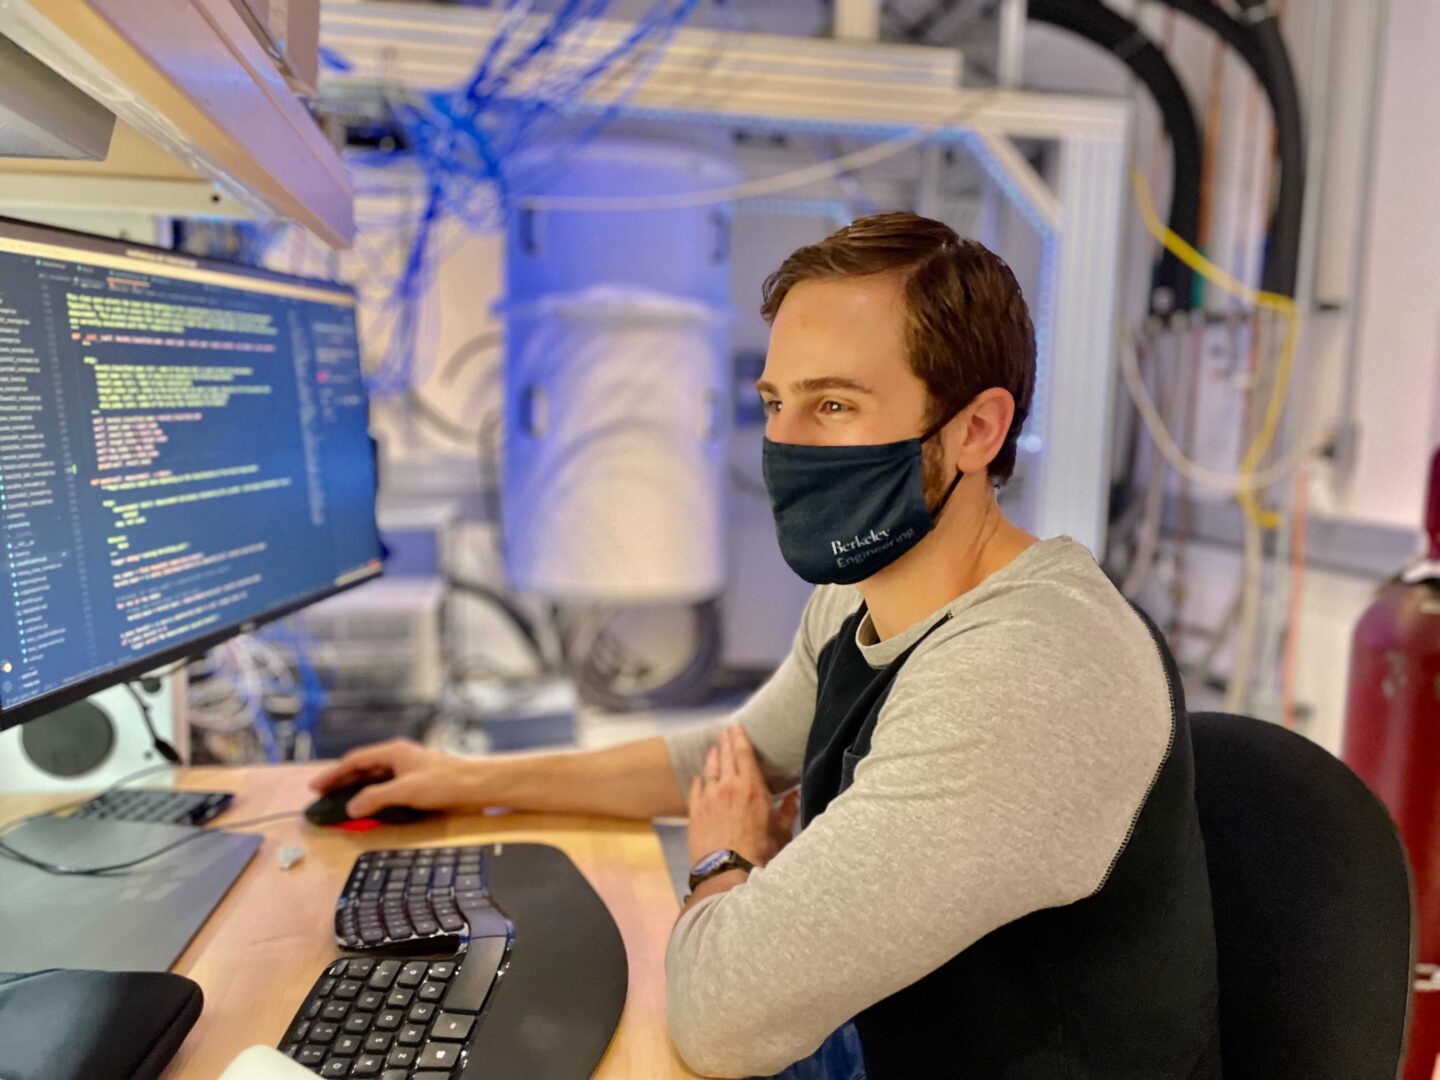 AQT researcher Akel Hashim working on room temperature electronic control systems for superconducting quantum processors (Credit: Christian Jünger/Berkeley Lab)